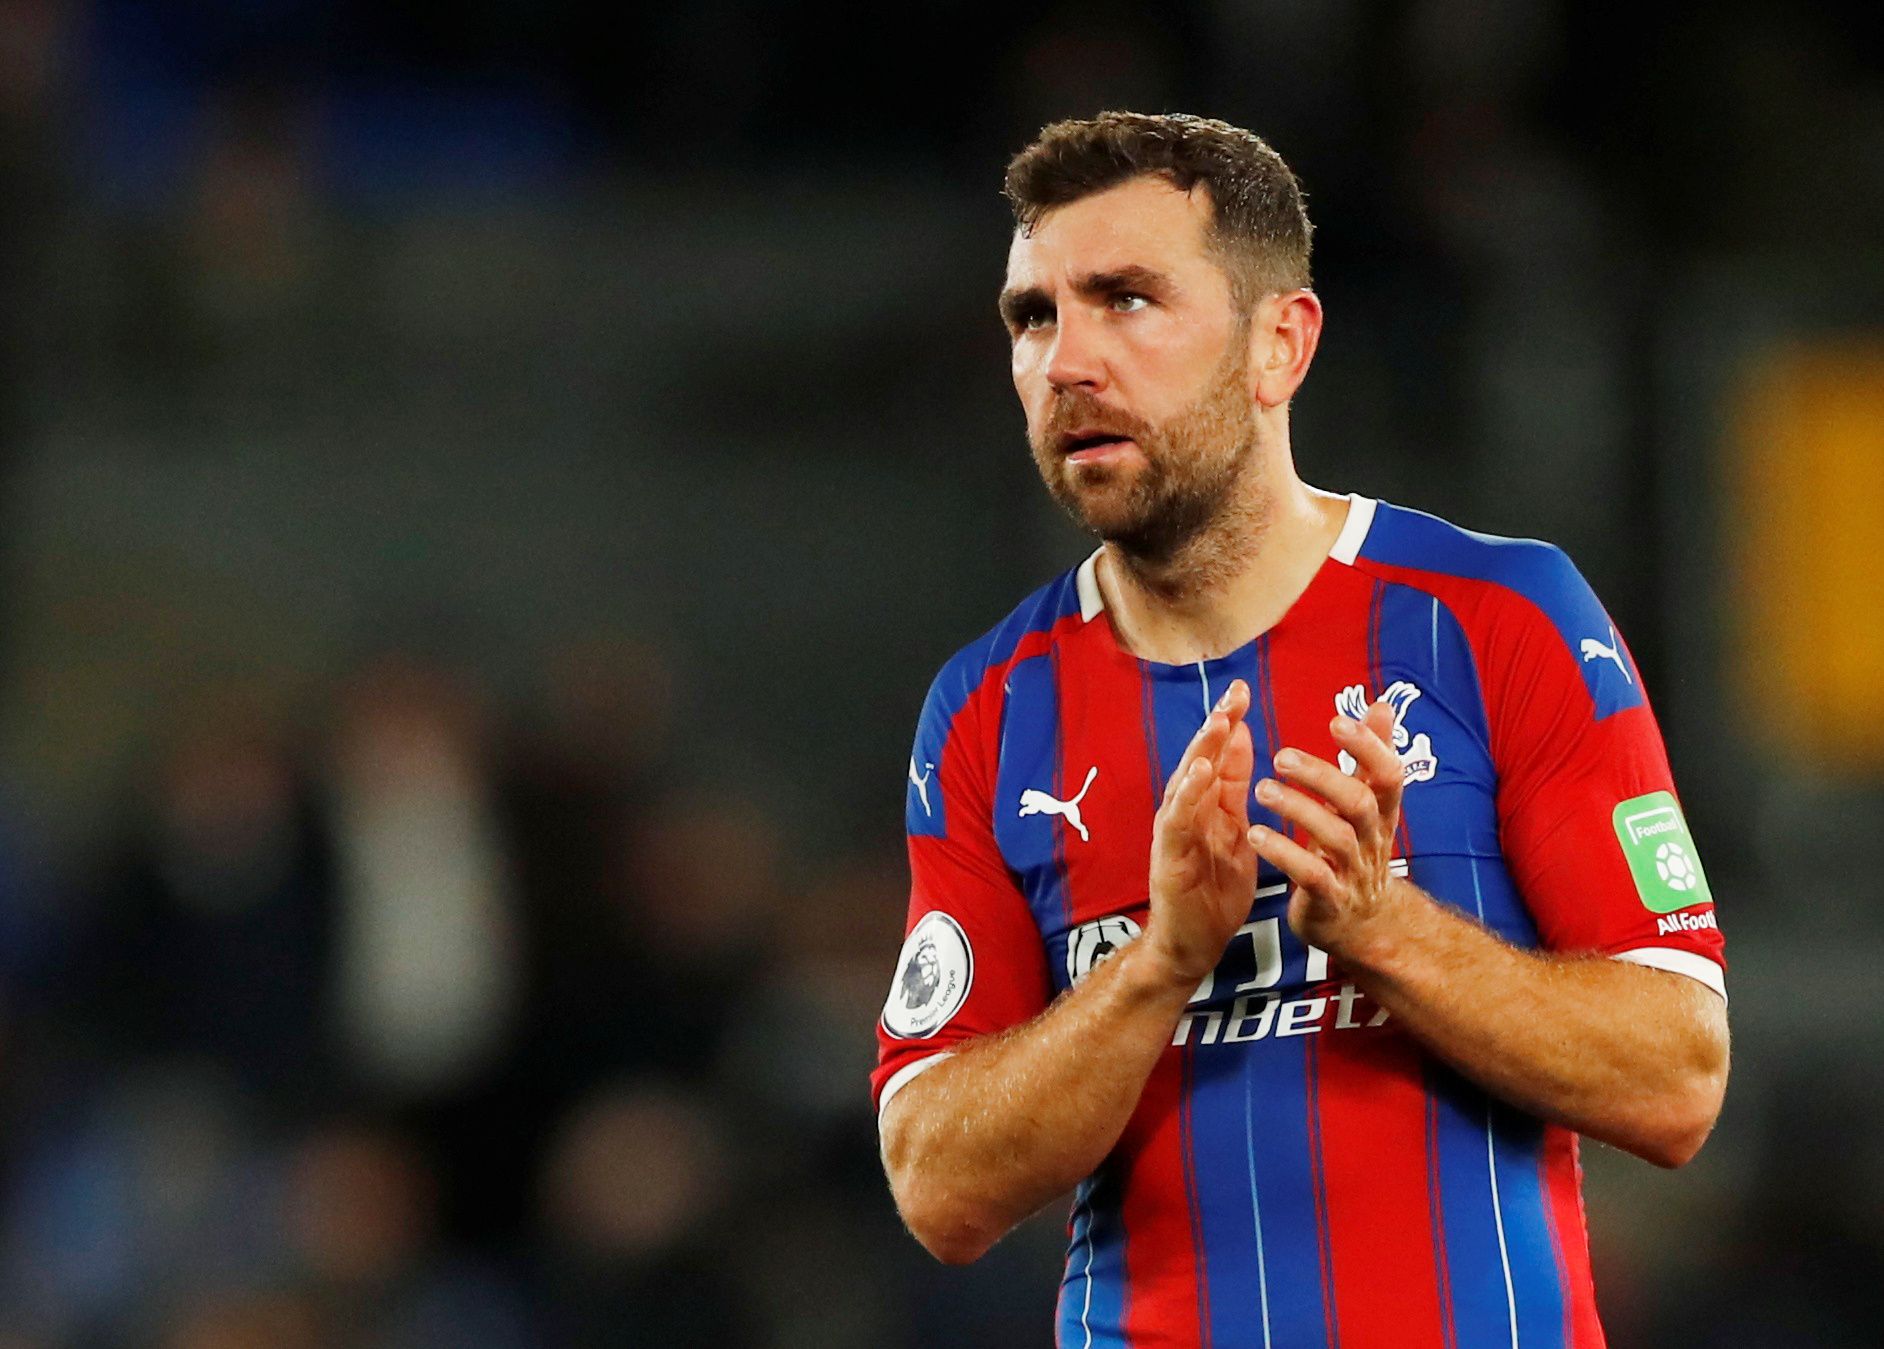 Soccer Football - Premier League - Crystal Palace v Manchester City - Selhurst Park, London, Britain - October 19, 2019  Crystal Palace's James McArthur looks dejected at the end of the match   Action Images via Reuters/Andrew Boyers  EDITORIAL USE ONLY. No use with unauthorized audio, video, data, fixture lists, club/league logos or 